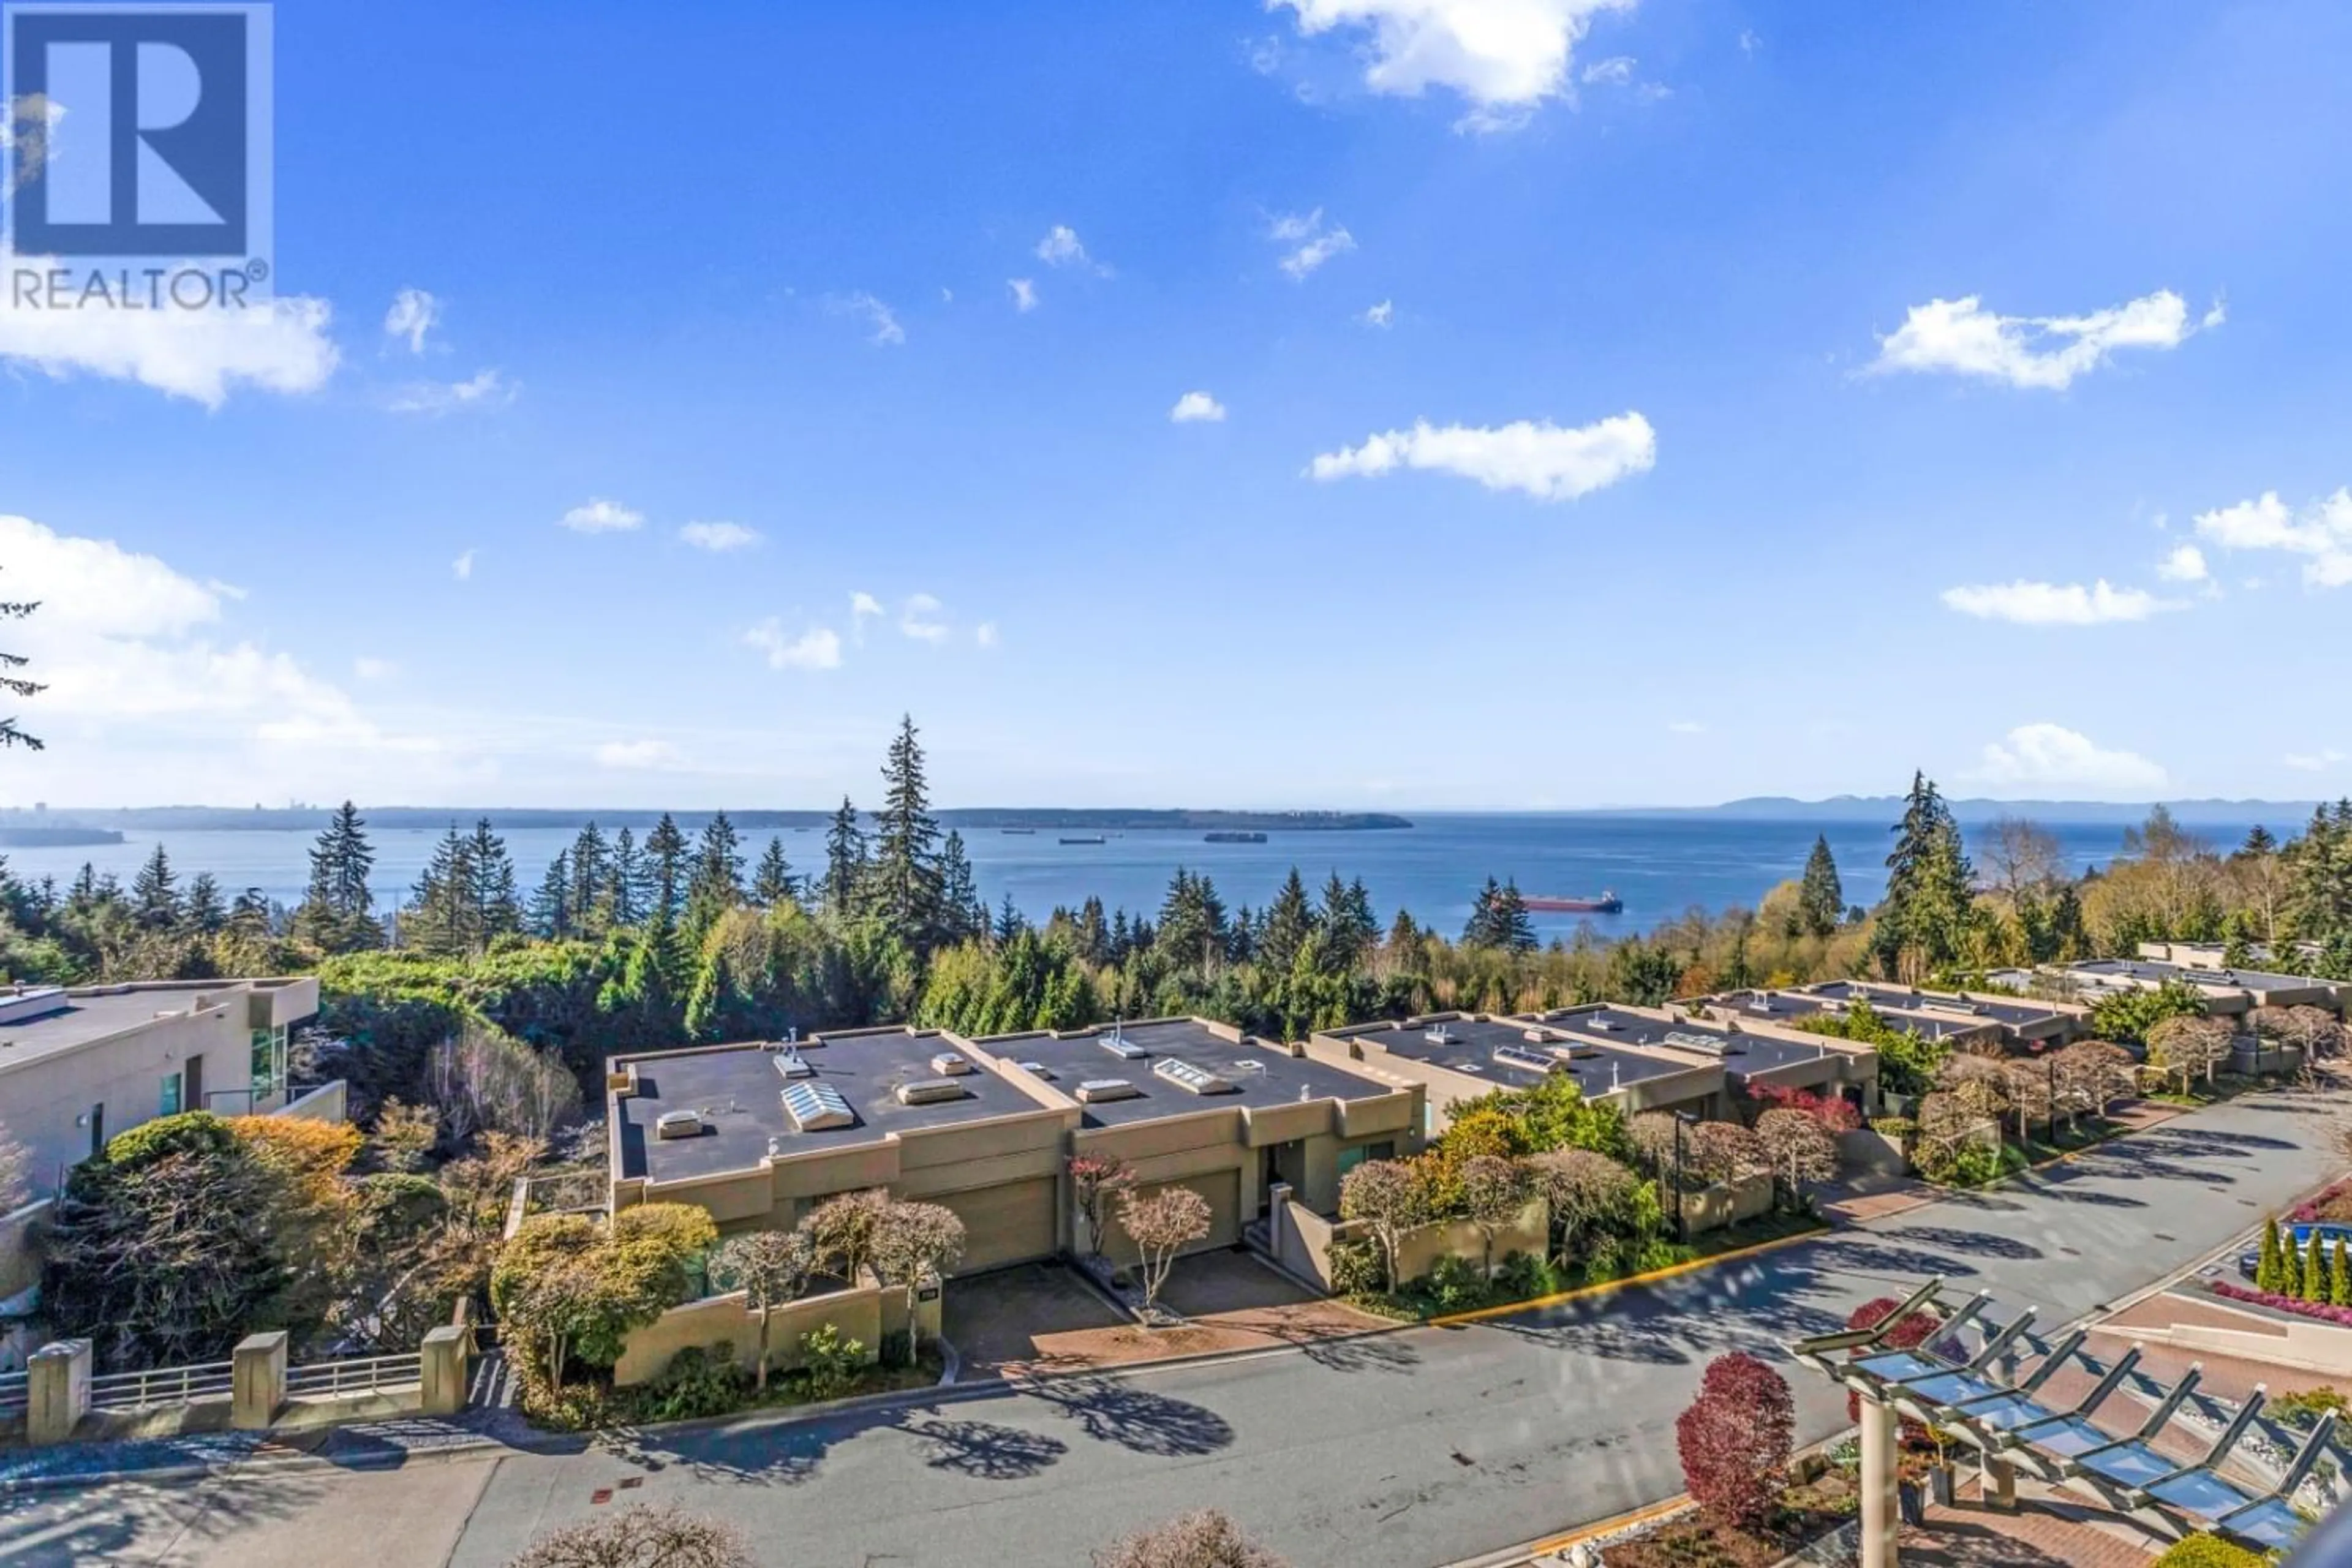 Lakeview for 403 3131 DEER RIDGE DRIVE, West Vancouver British Columbia V7S4W1